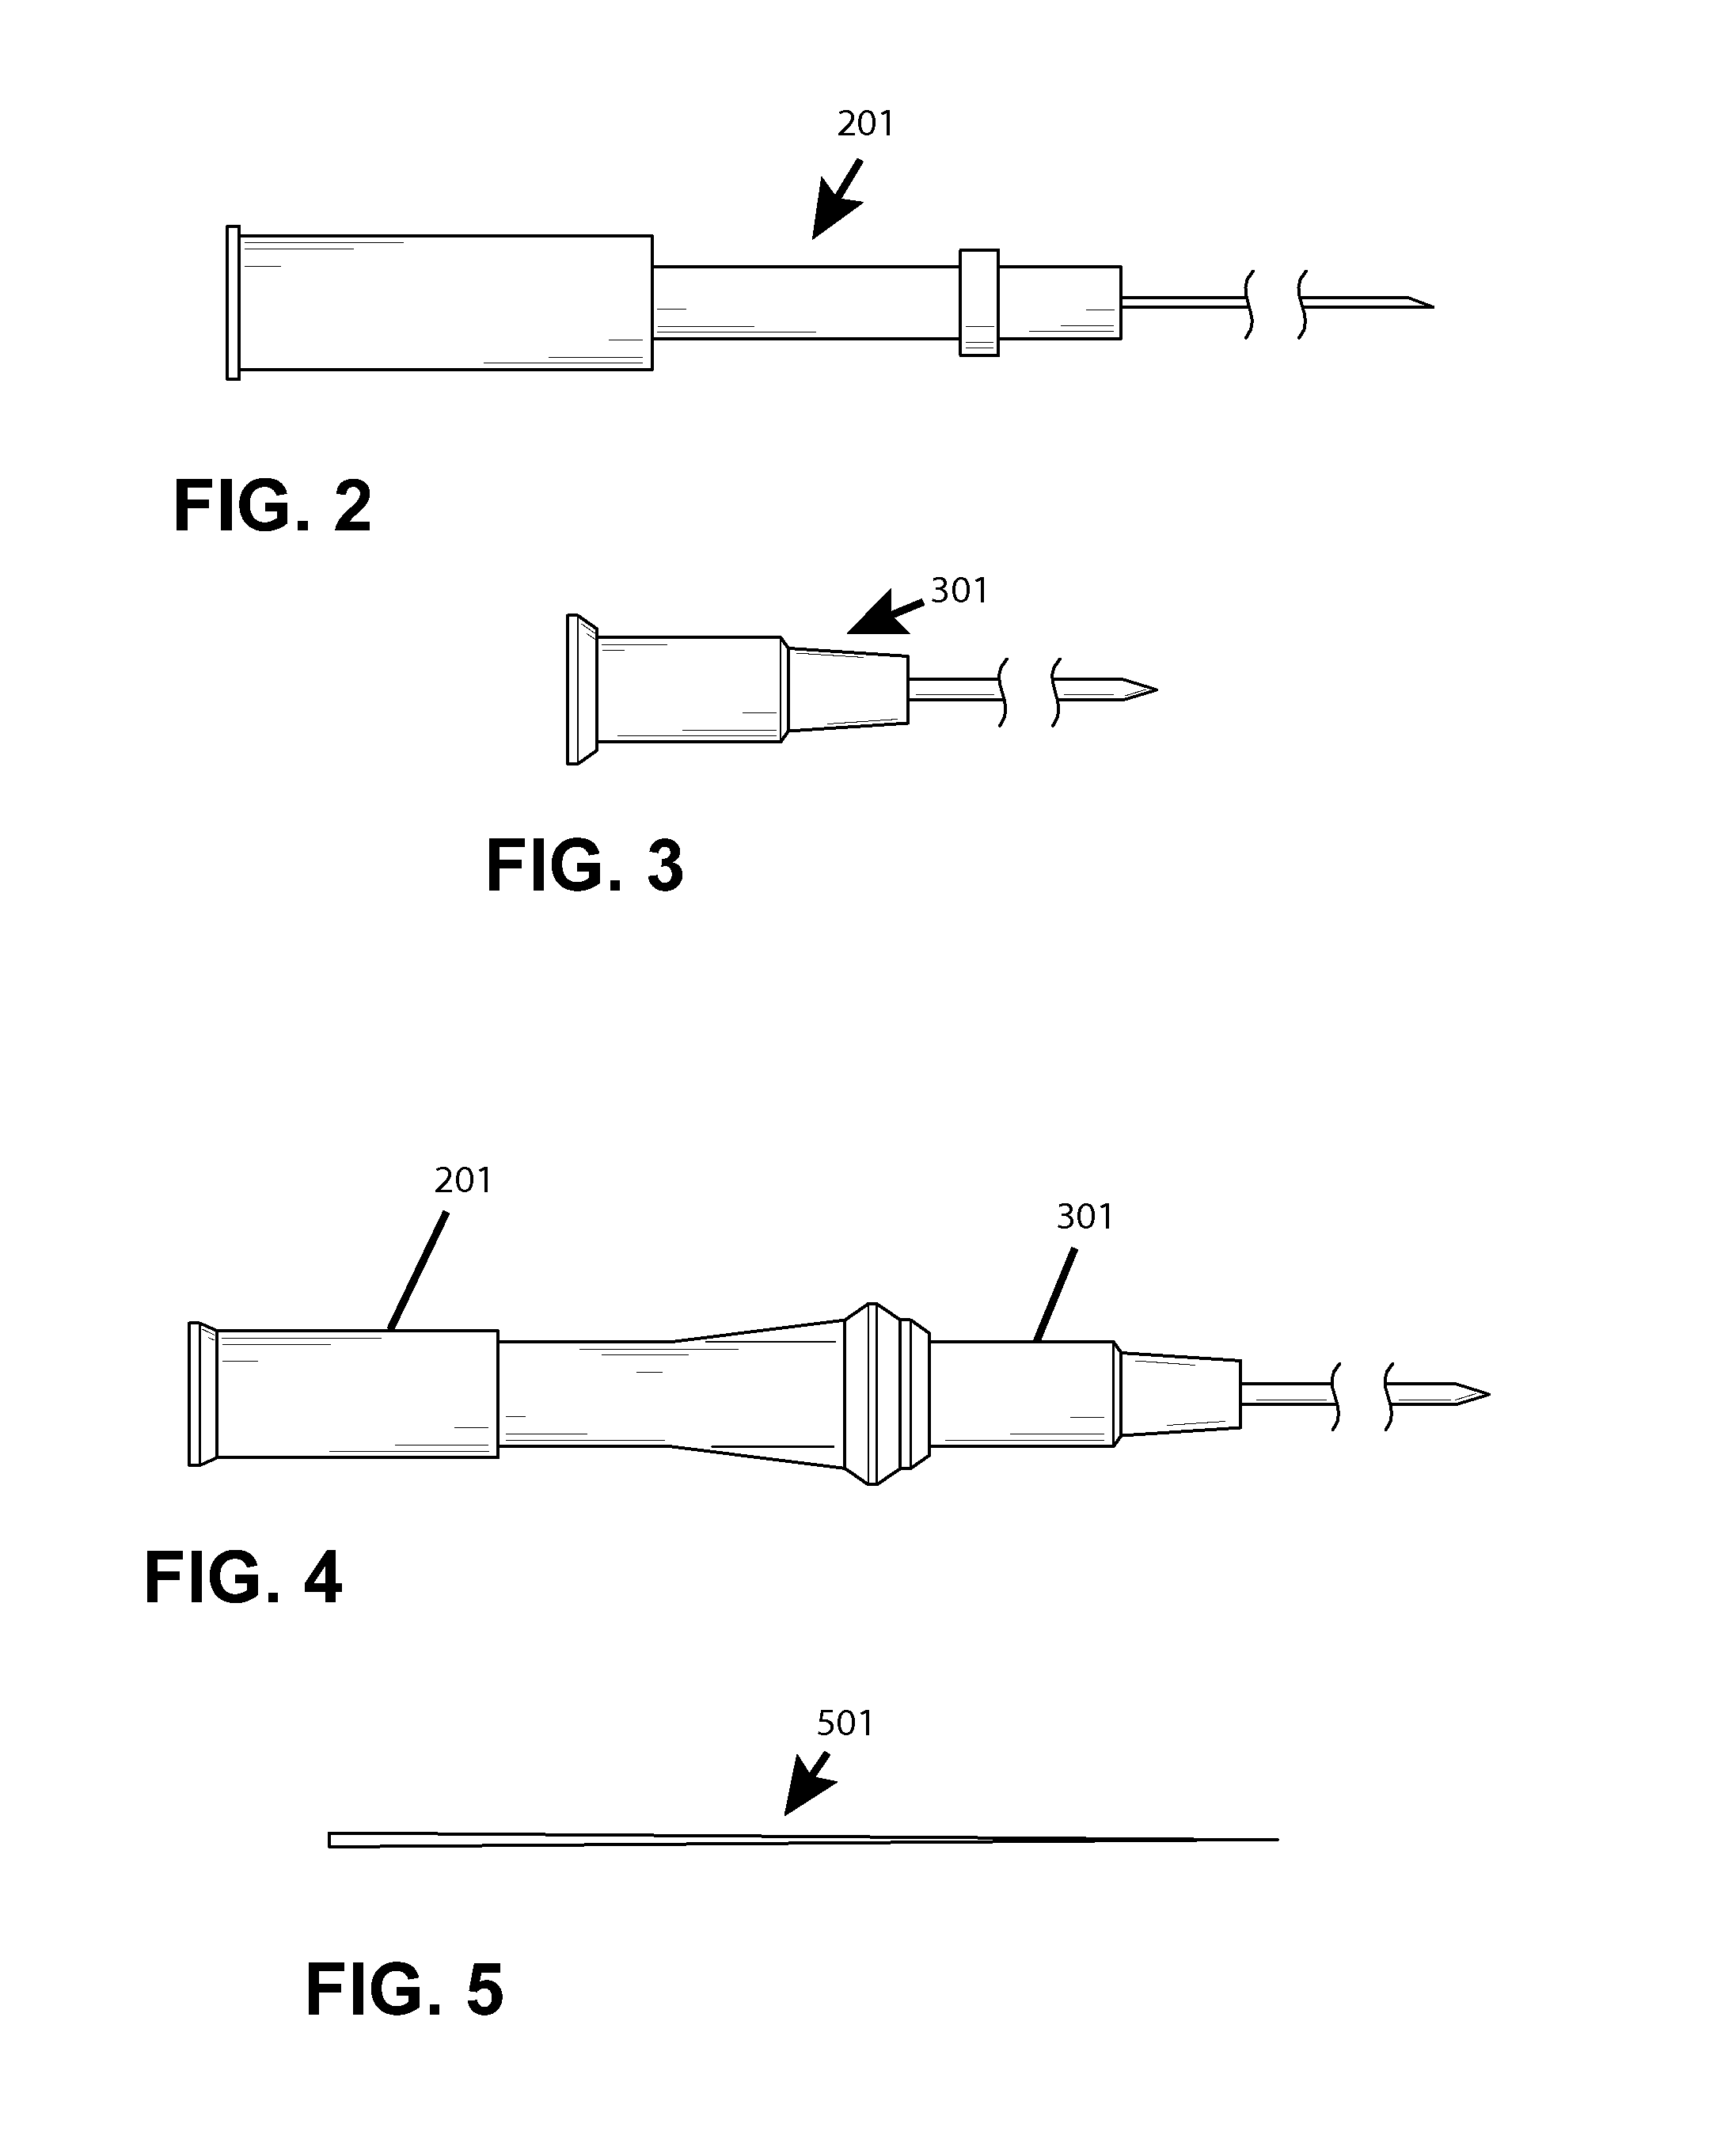 Arthroscopic joint surgery device and method of use